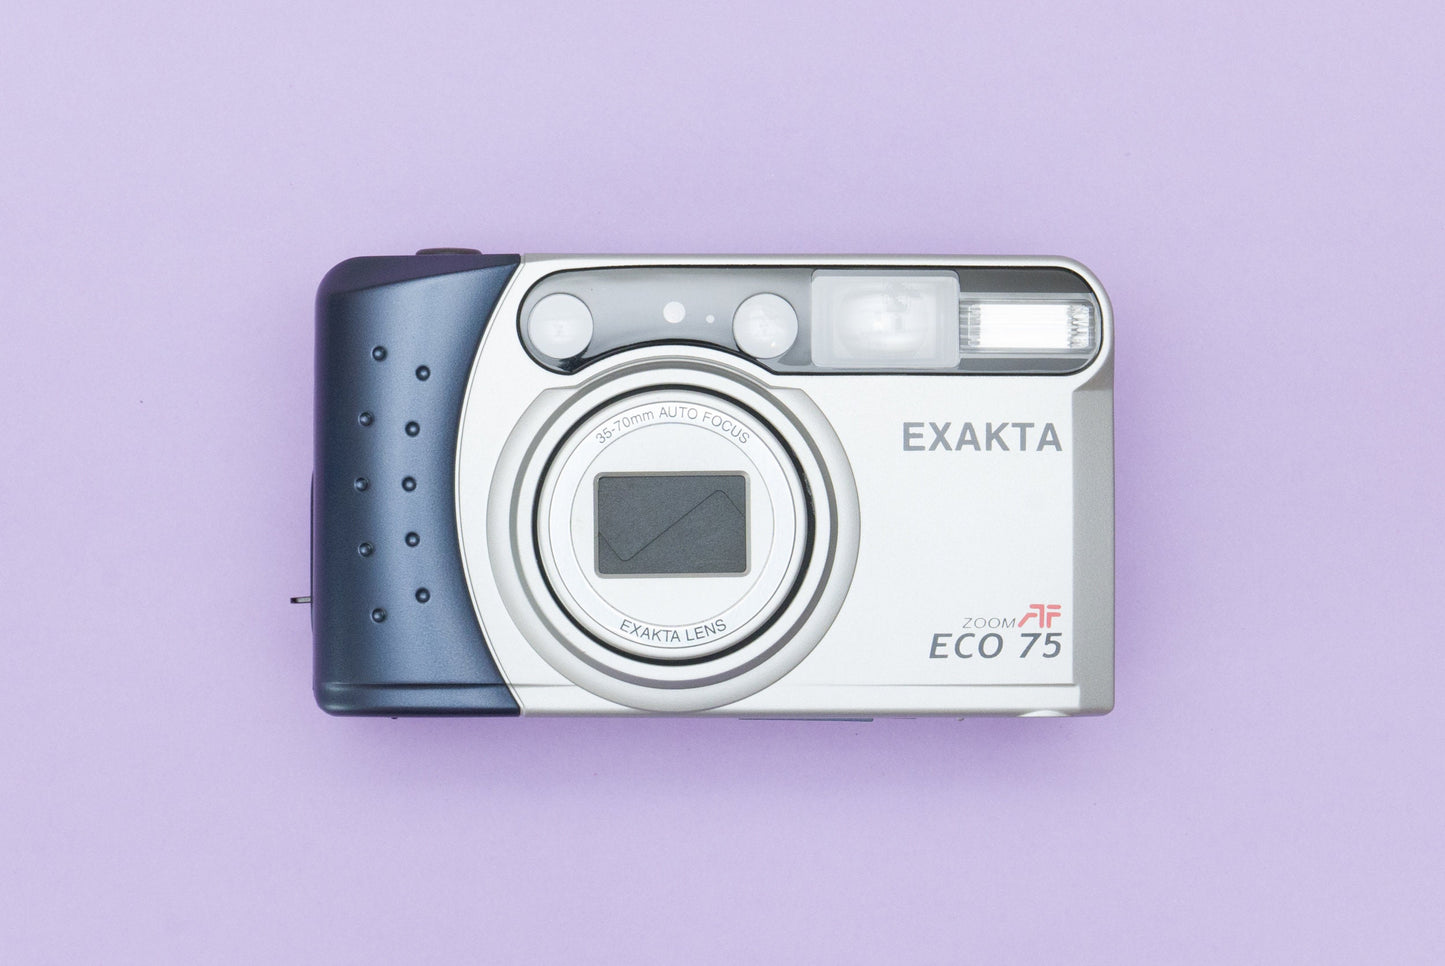 Exakta ECO 75 Zoom AF Compact Point and Shoot 35mm Film Camera